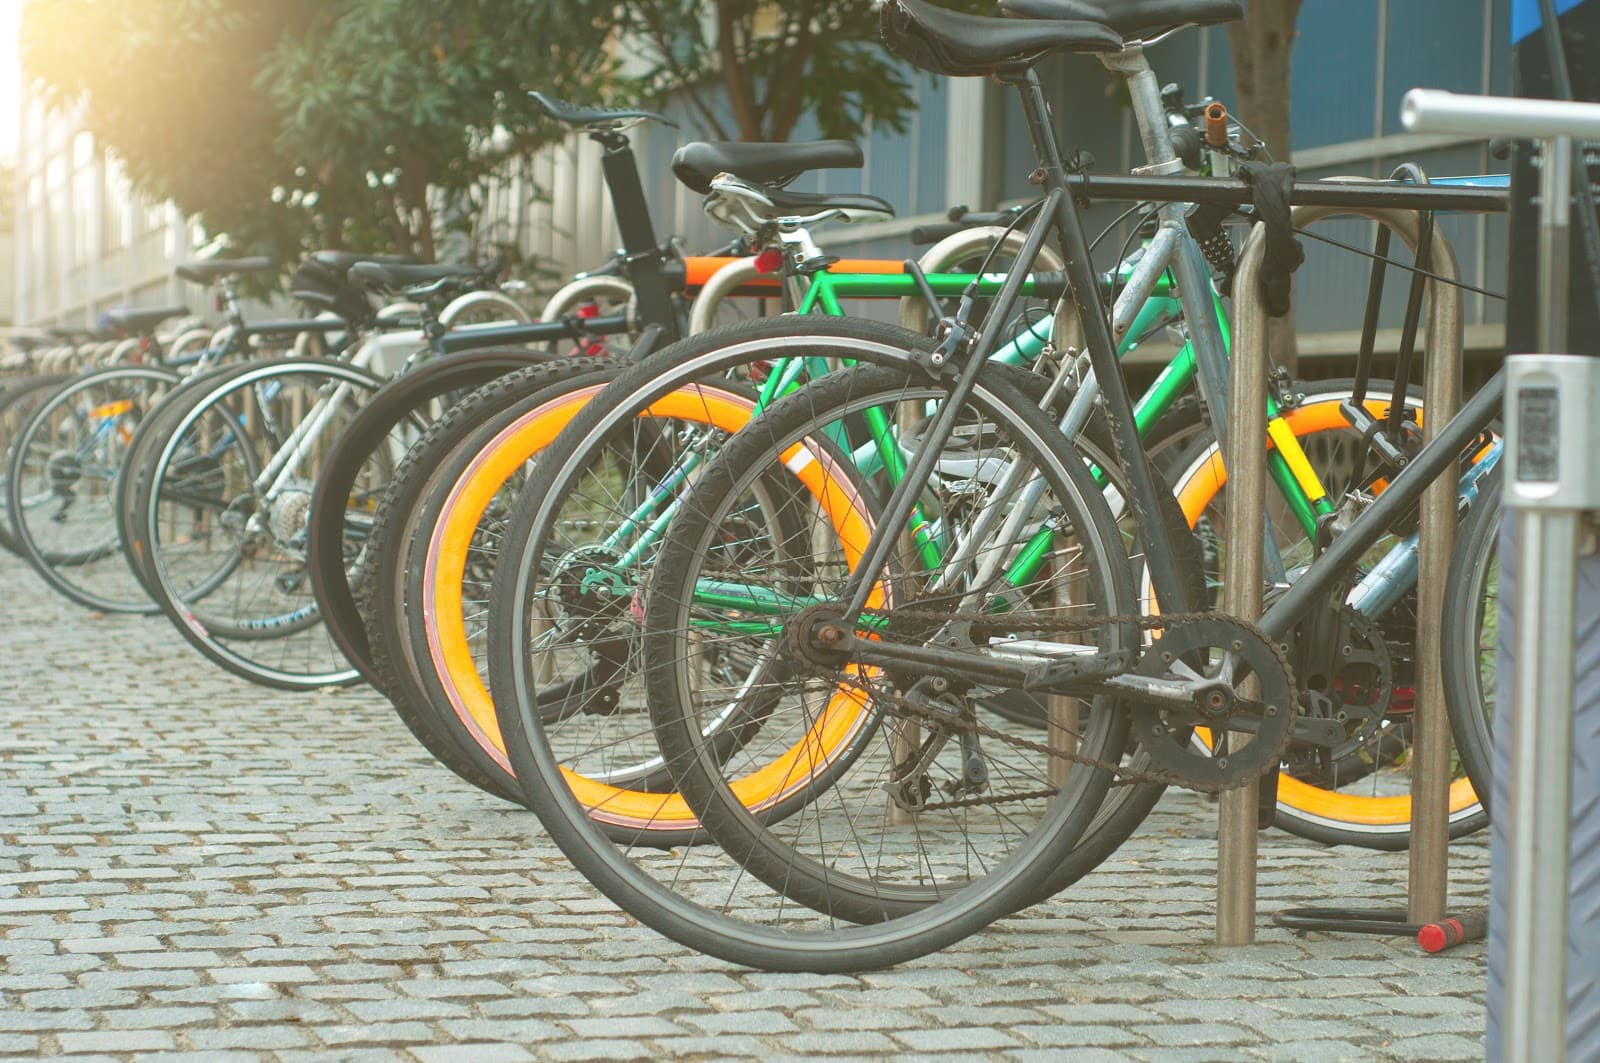 Bike Theft Is A Serious Problem With Electric Bikes